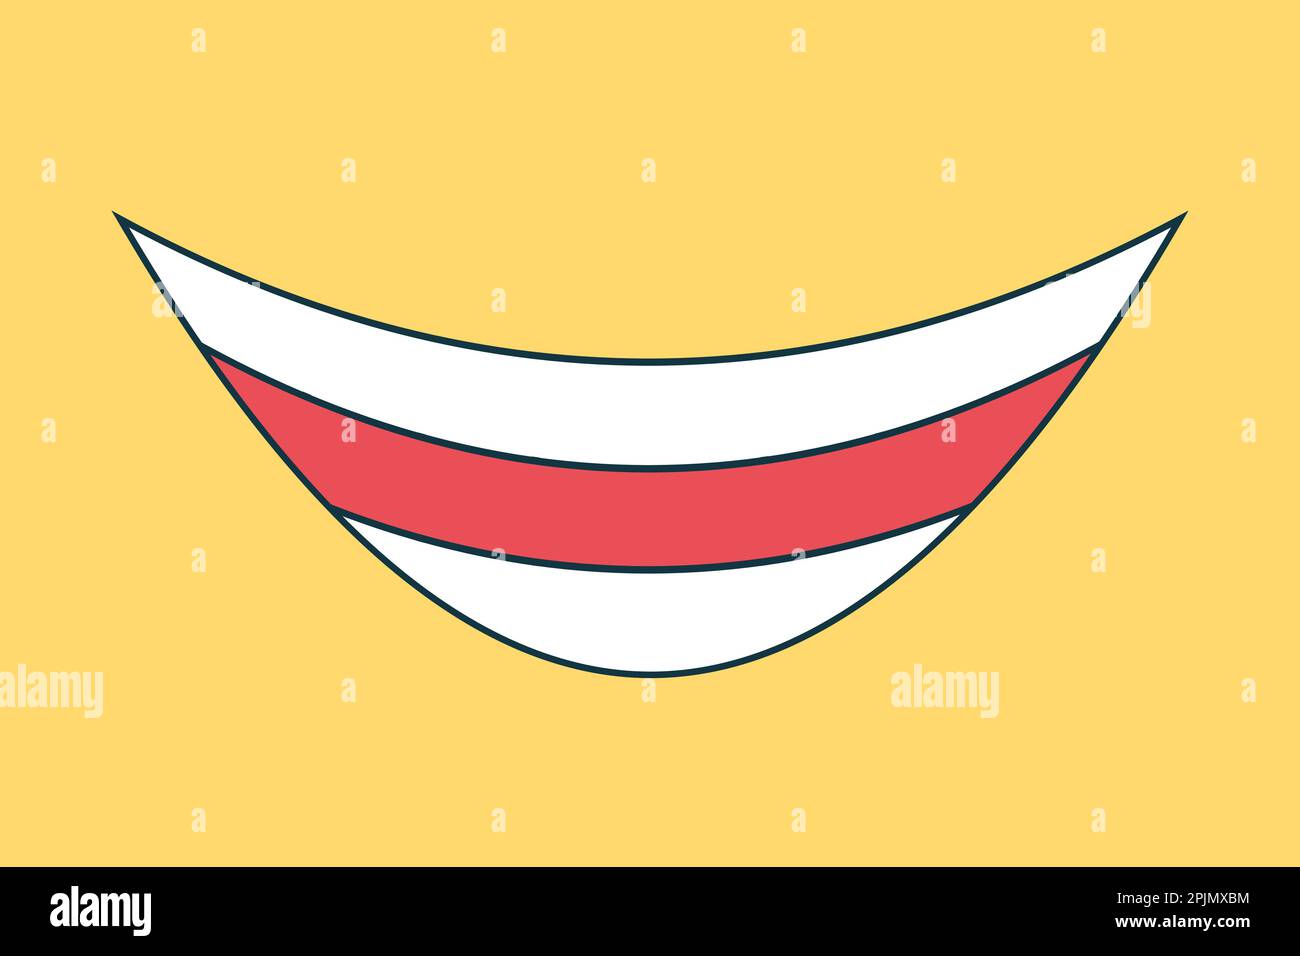 Broad happy smile. Emoticon template on yellow background. Smile face. Mouth with teeth drawing. Joy, fun emoticon. Vector illustration Stock Vector